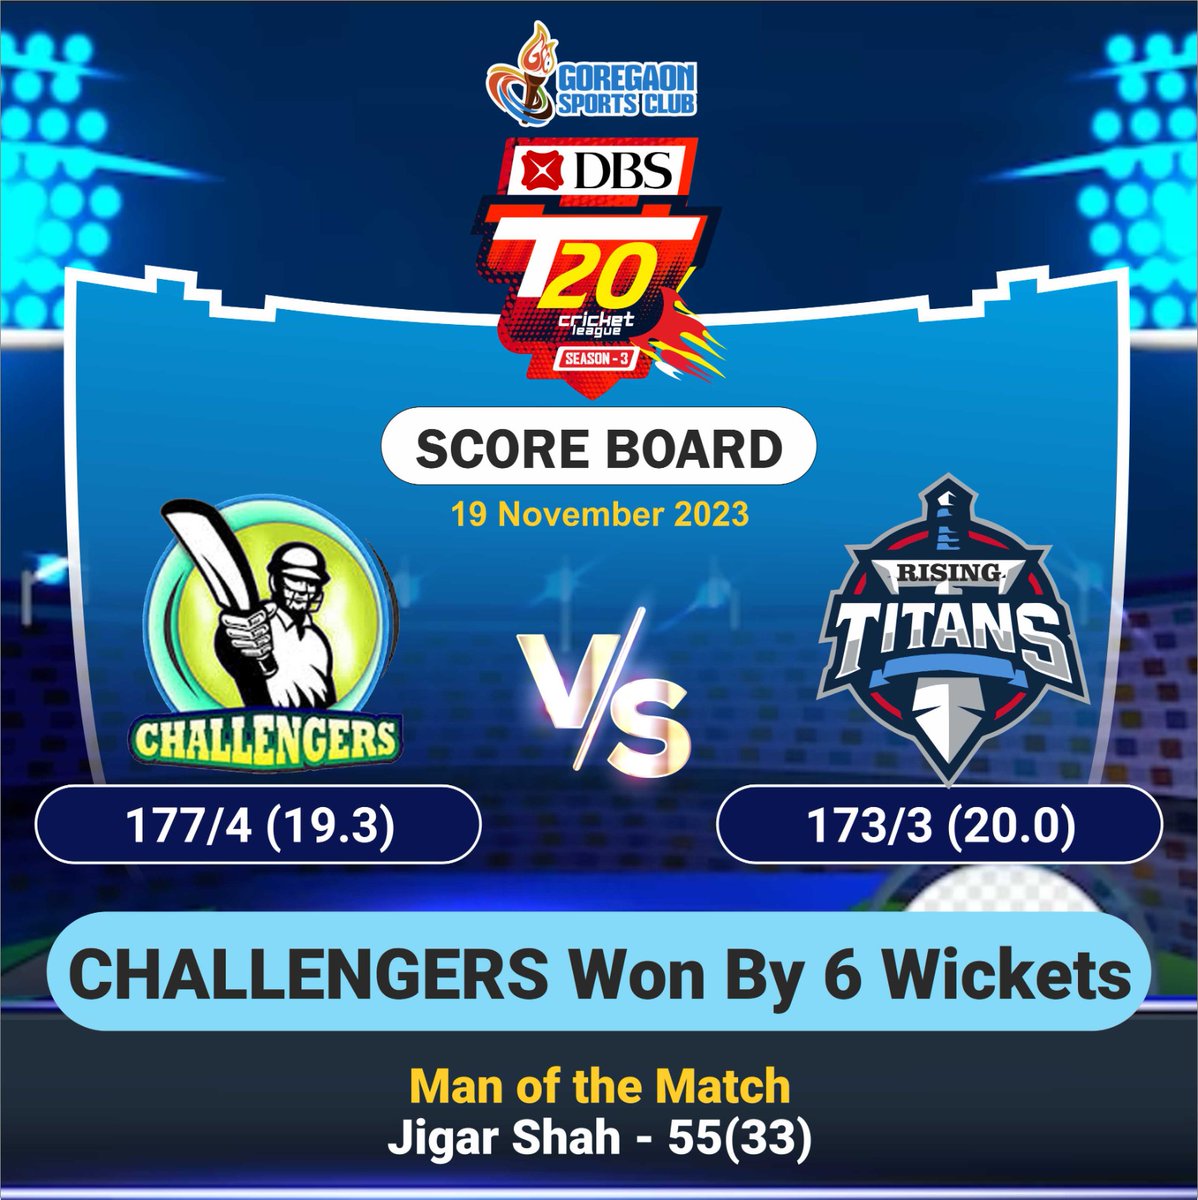 Team Challengers won by 6 wickets against Team Rising Titans in the match today!
Jigar Shah earned the Man of the Match title scoring 55 runs of 33 balls
We are proud of our winners!
.
.
.
#GSCT20 #GSCCricket #TeamRisingtitans #TeamChallengers #Scoreboard